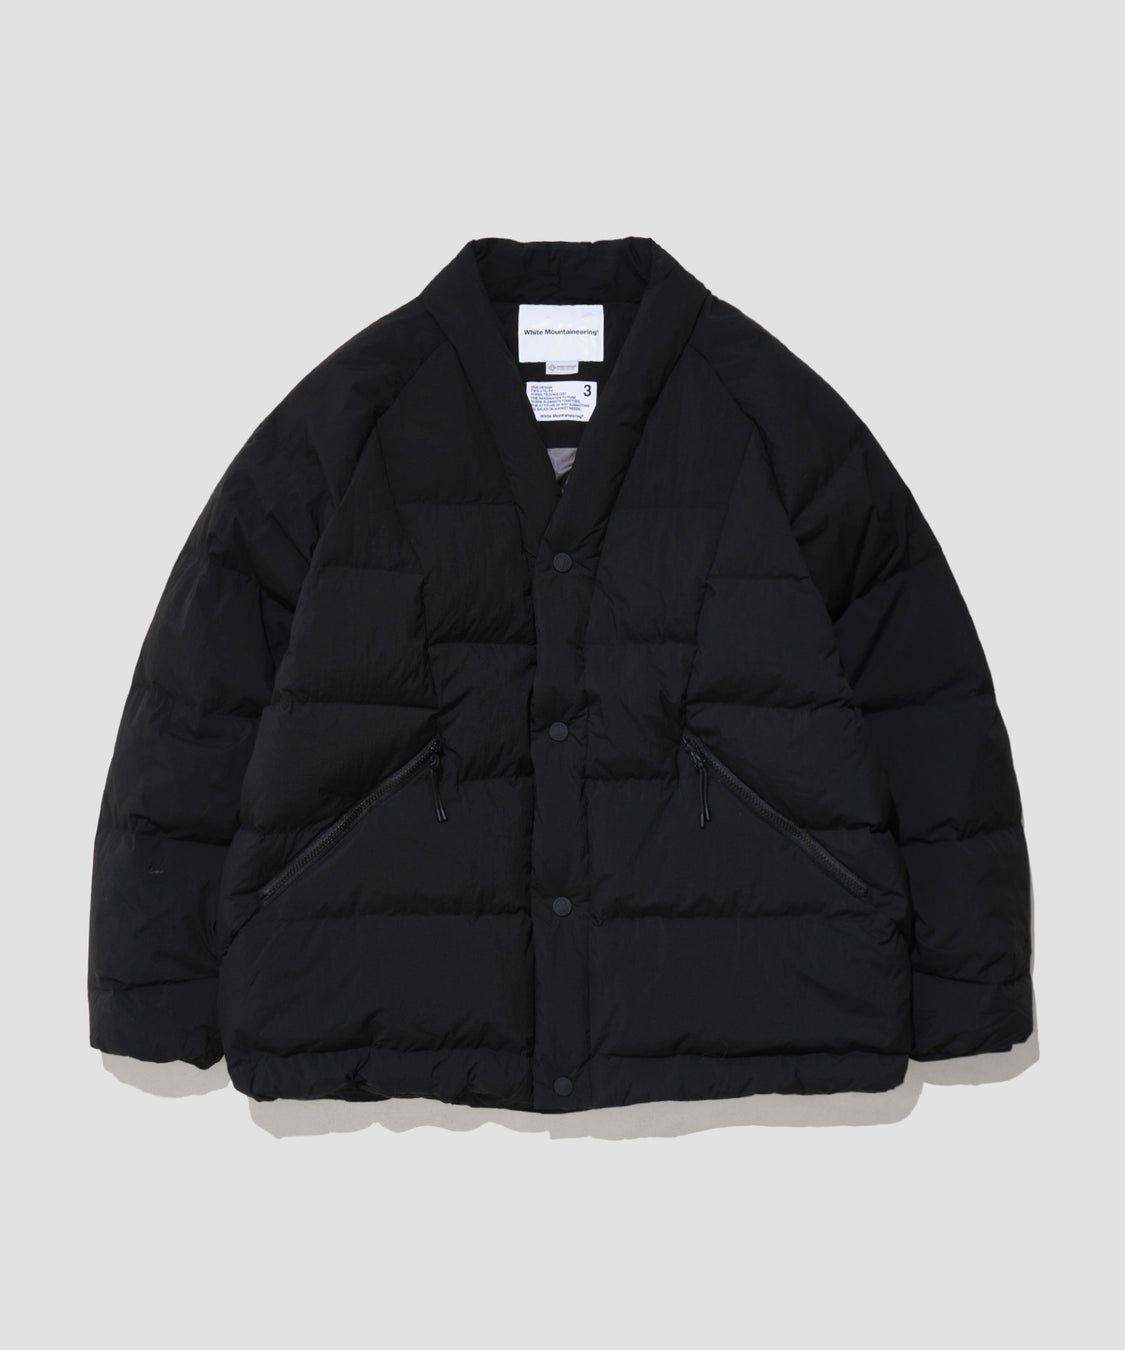 White Mountaineering WINDSTOPPER ® by GORE-TEX COLLECTIONダウンやフリース全3型を11/2（木）12：00　THE TOKYO別注で発売開始のサブ画像2